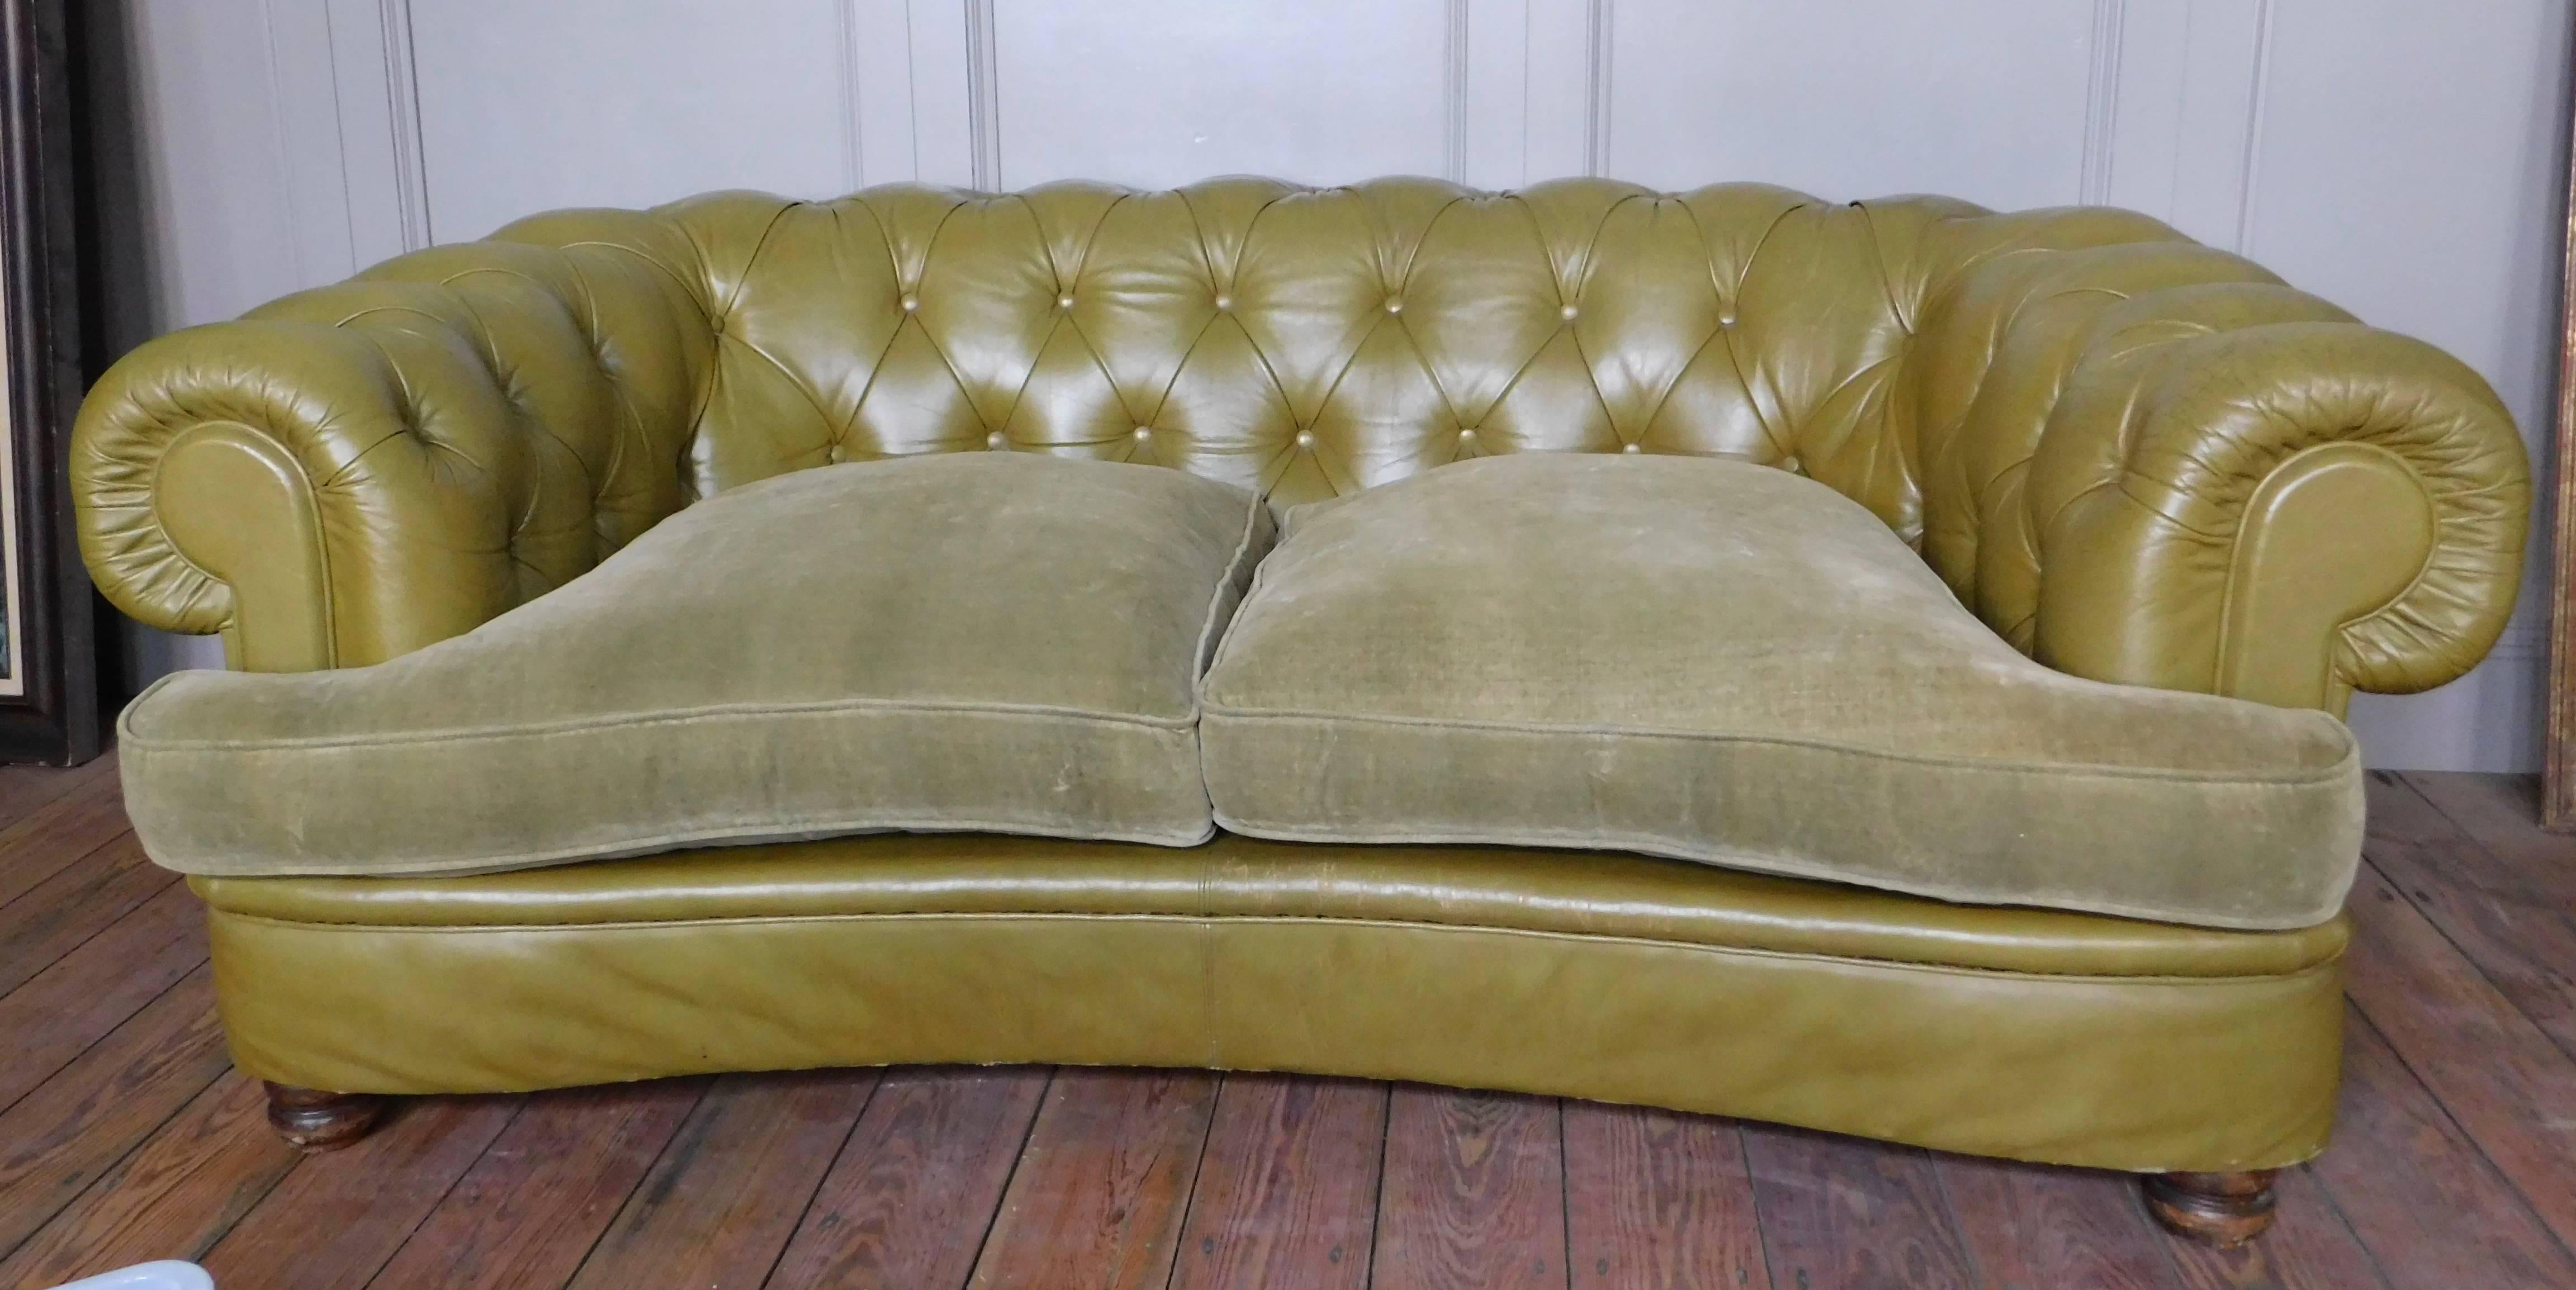 English leather Chesterfield settee with feather filled velvet cushions, circa 1950. The settee is curved in the front to form a kidney bean type shape which makes the form more interesting and visually appealing than the average Chesterfield